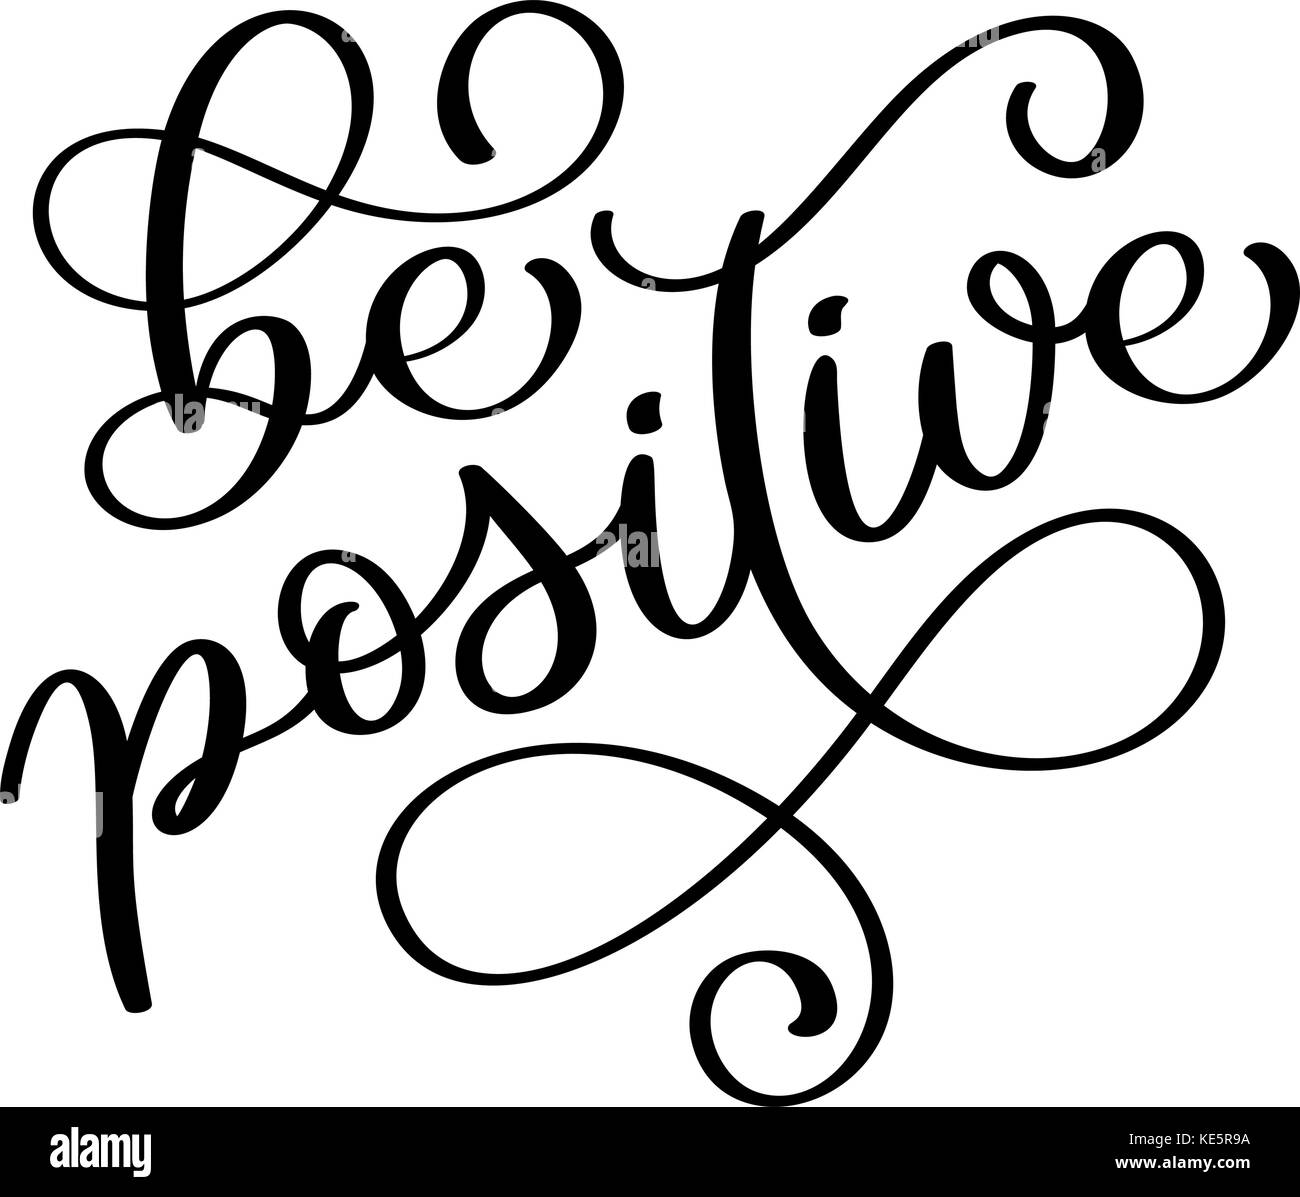 Be positive. Inspirational Modern calligraphy phrase with hand drawn. Lettering in boho style for print and posters. Hippie quotes collection. Typography poster design Stock Vector